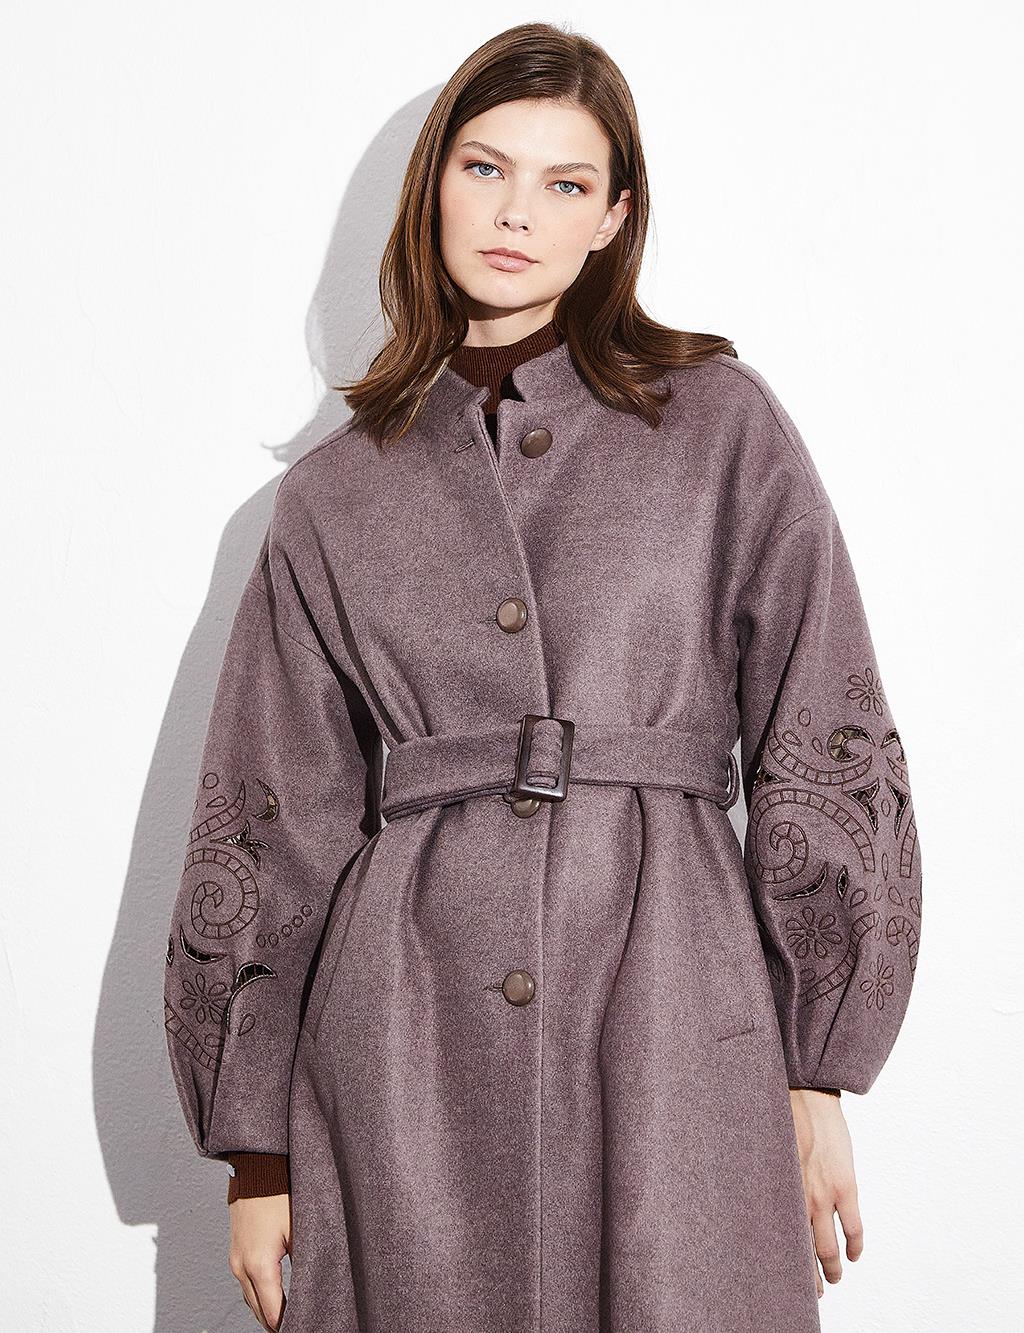 Embroidered Laser Cut Buttoned Coat Desert Brown